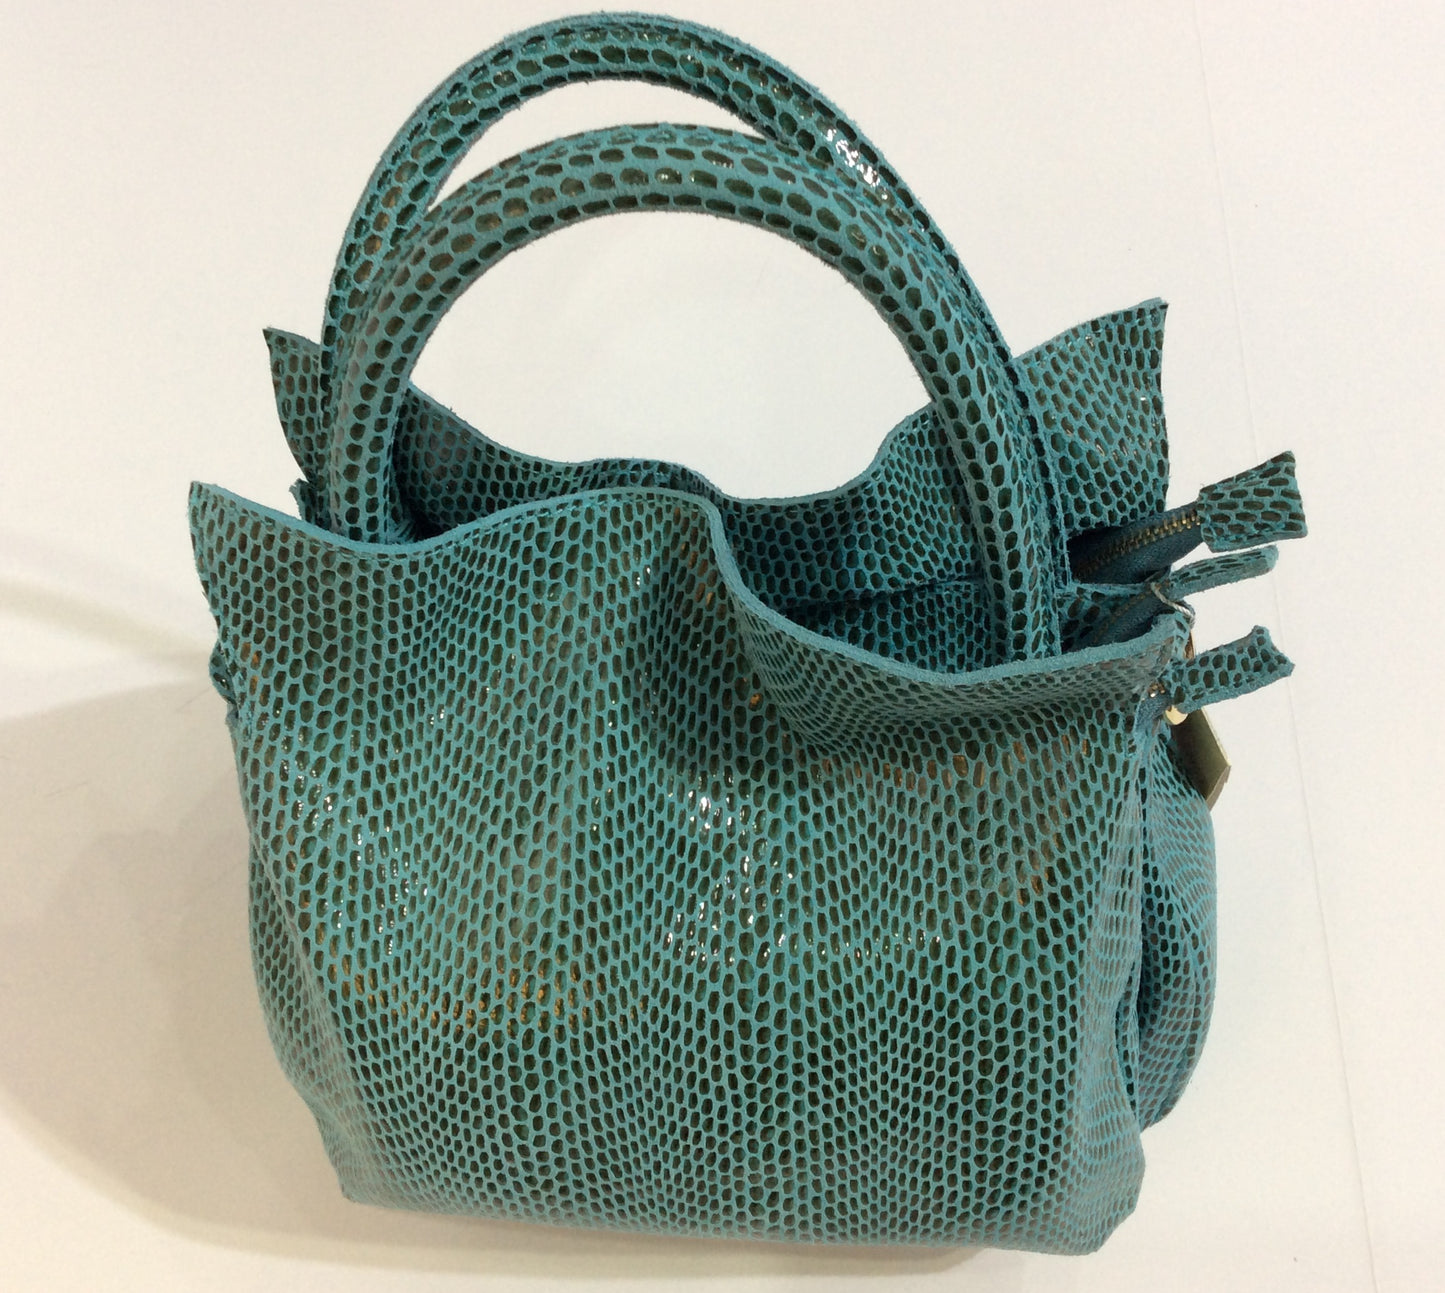 Embossed teal and grey Italian leather purse in faux reptile pattern